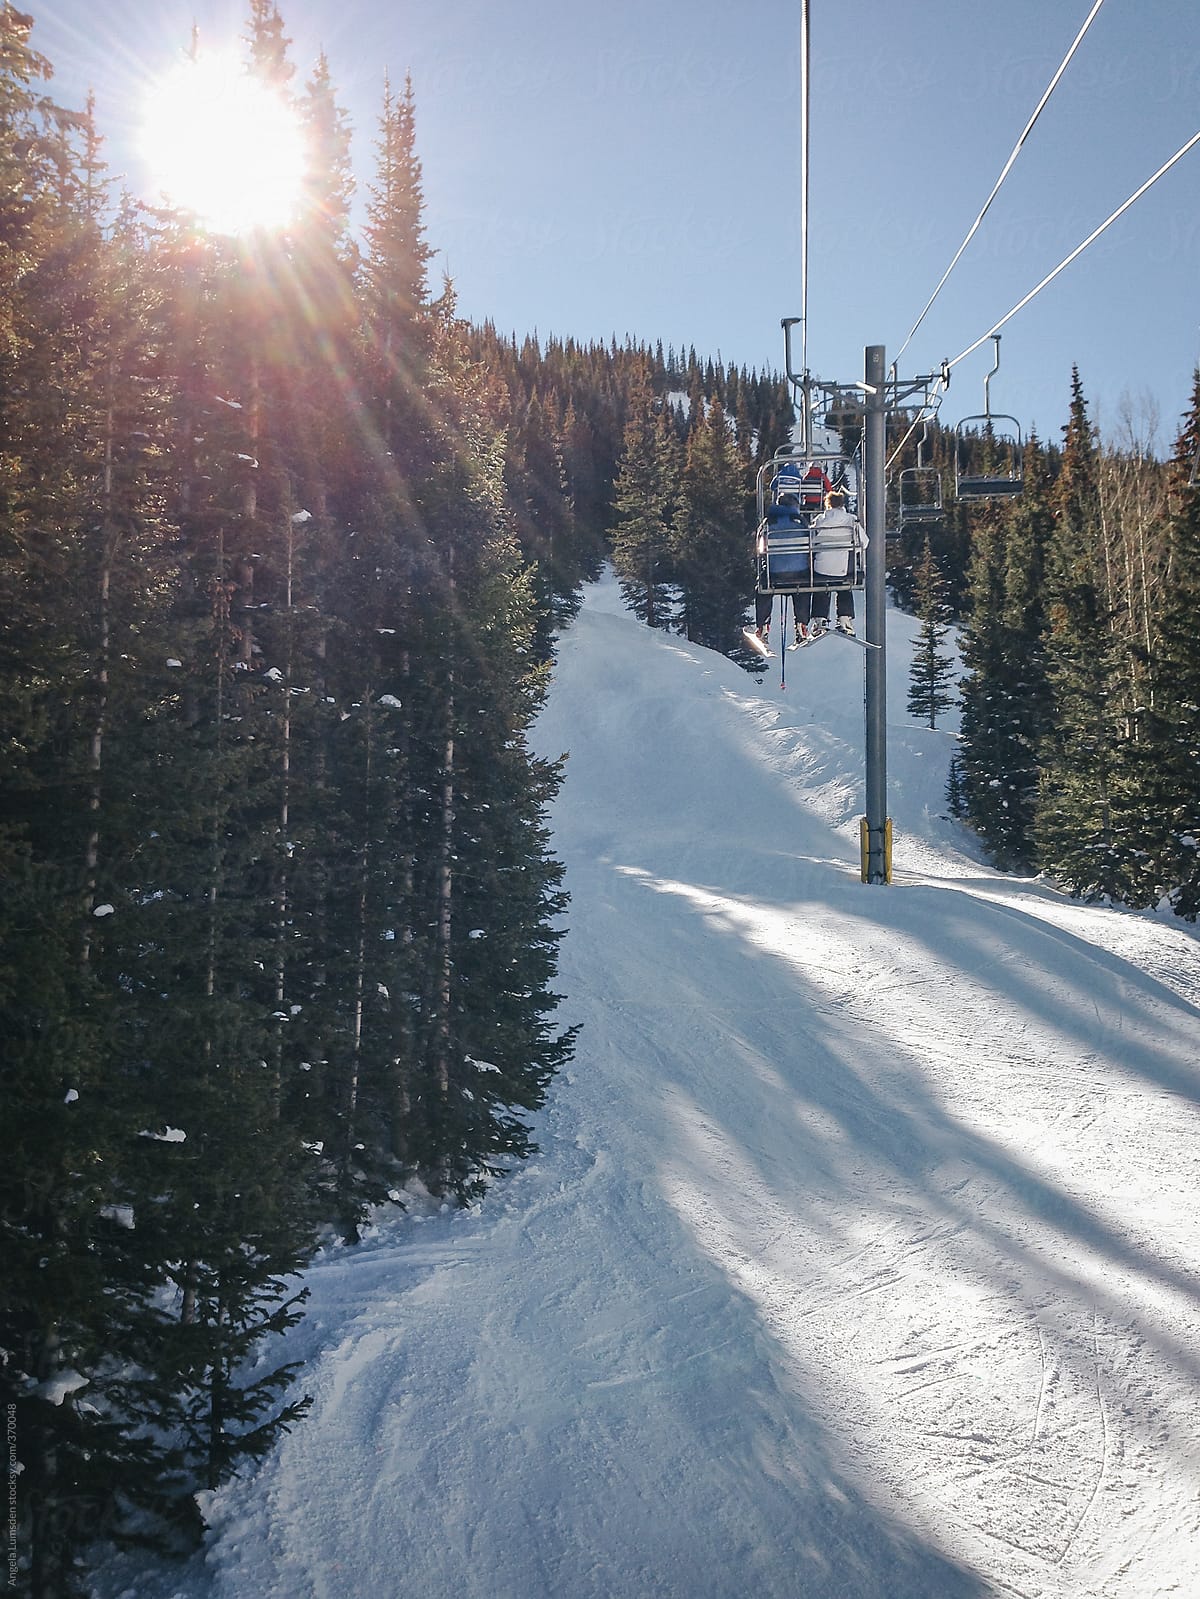 A chairlift ride through the trees on a bluebird day at a ski resort